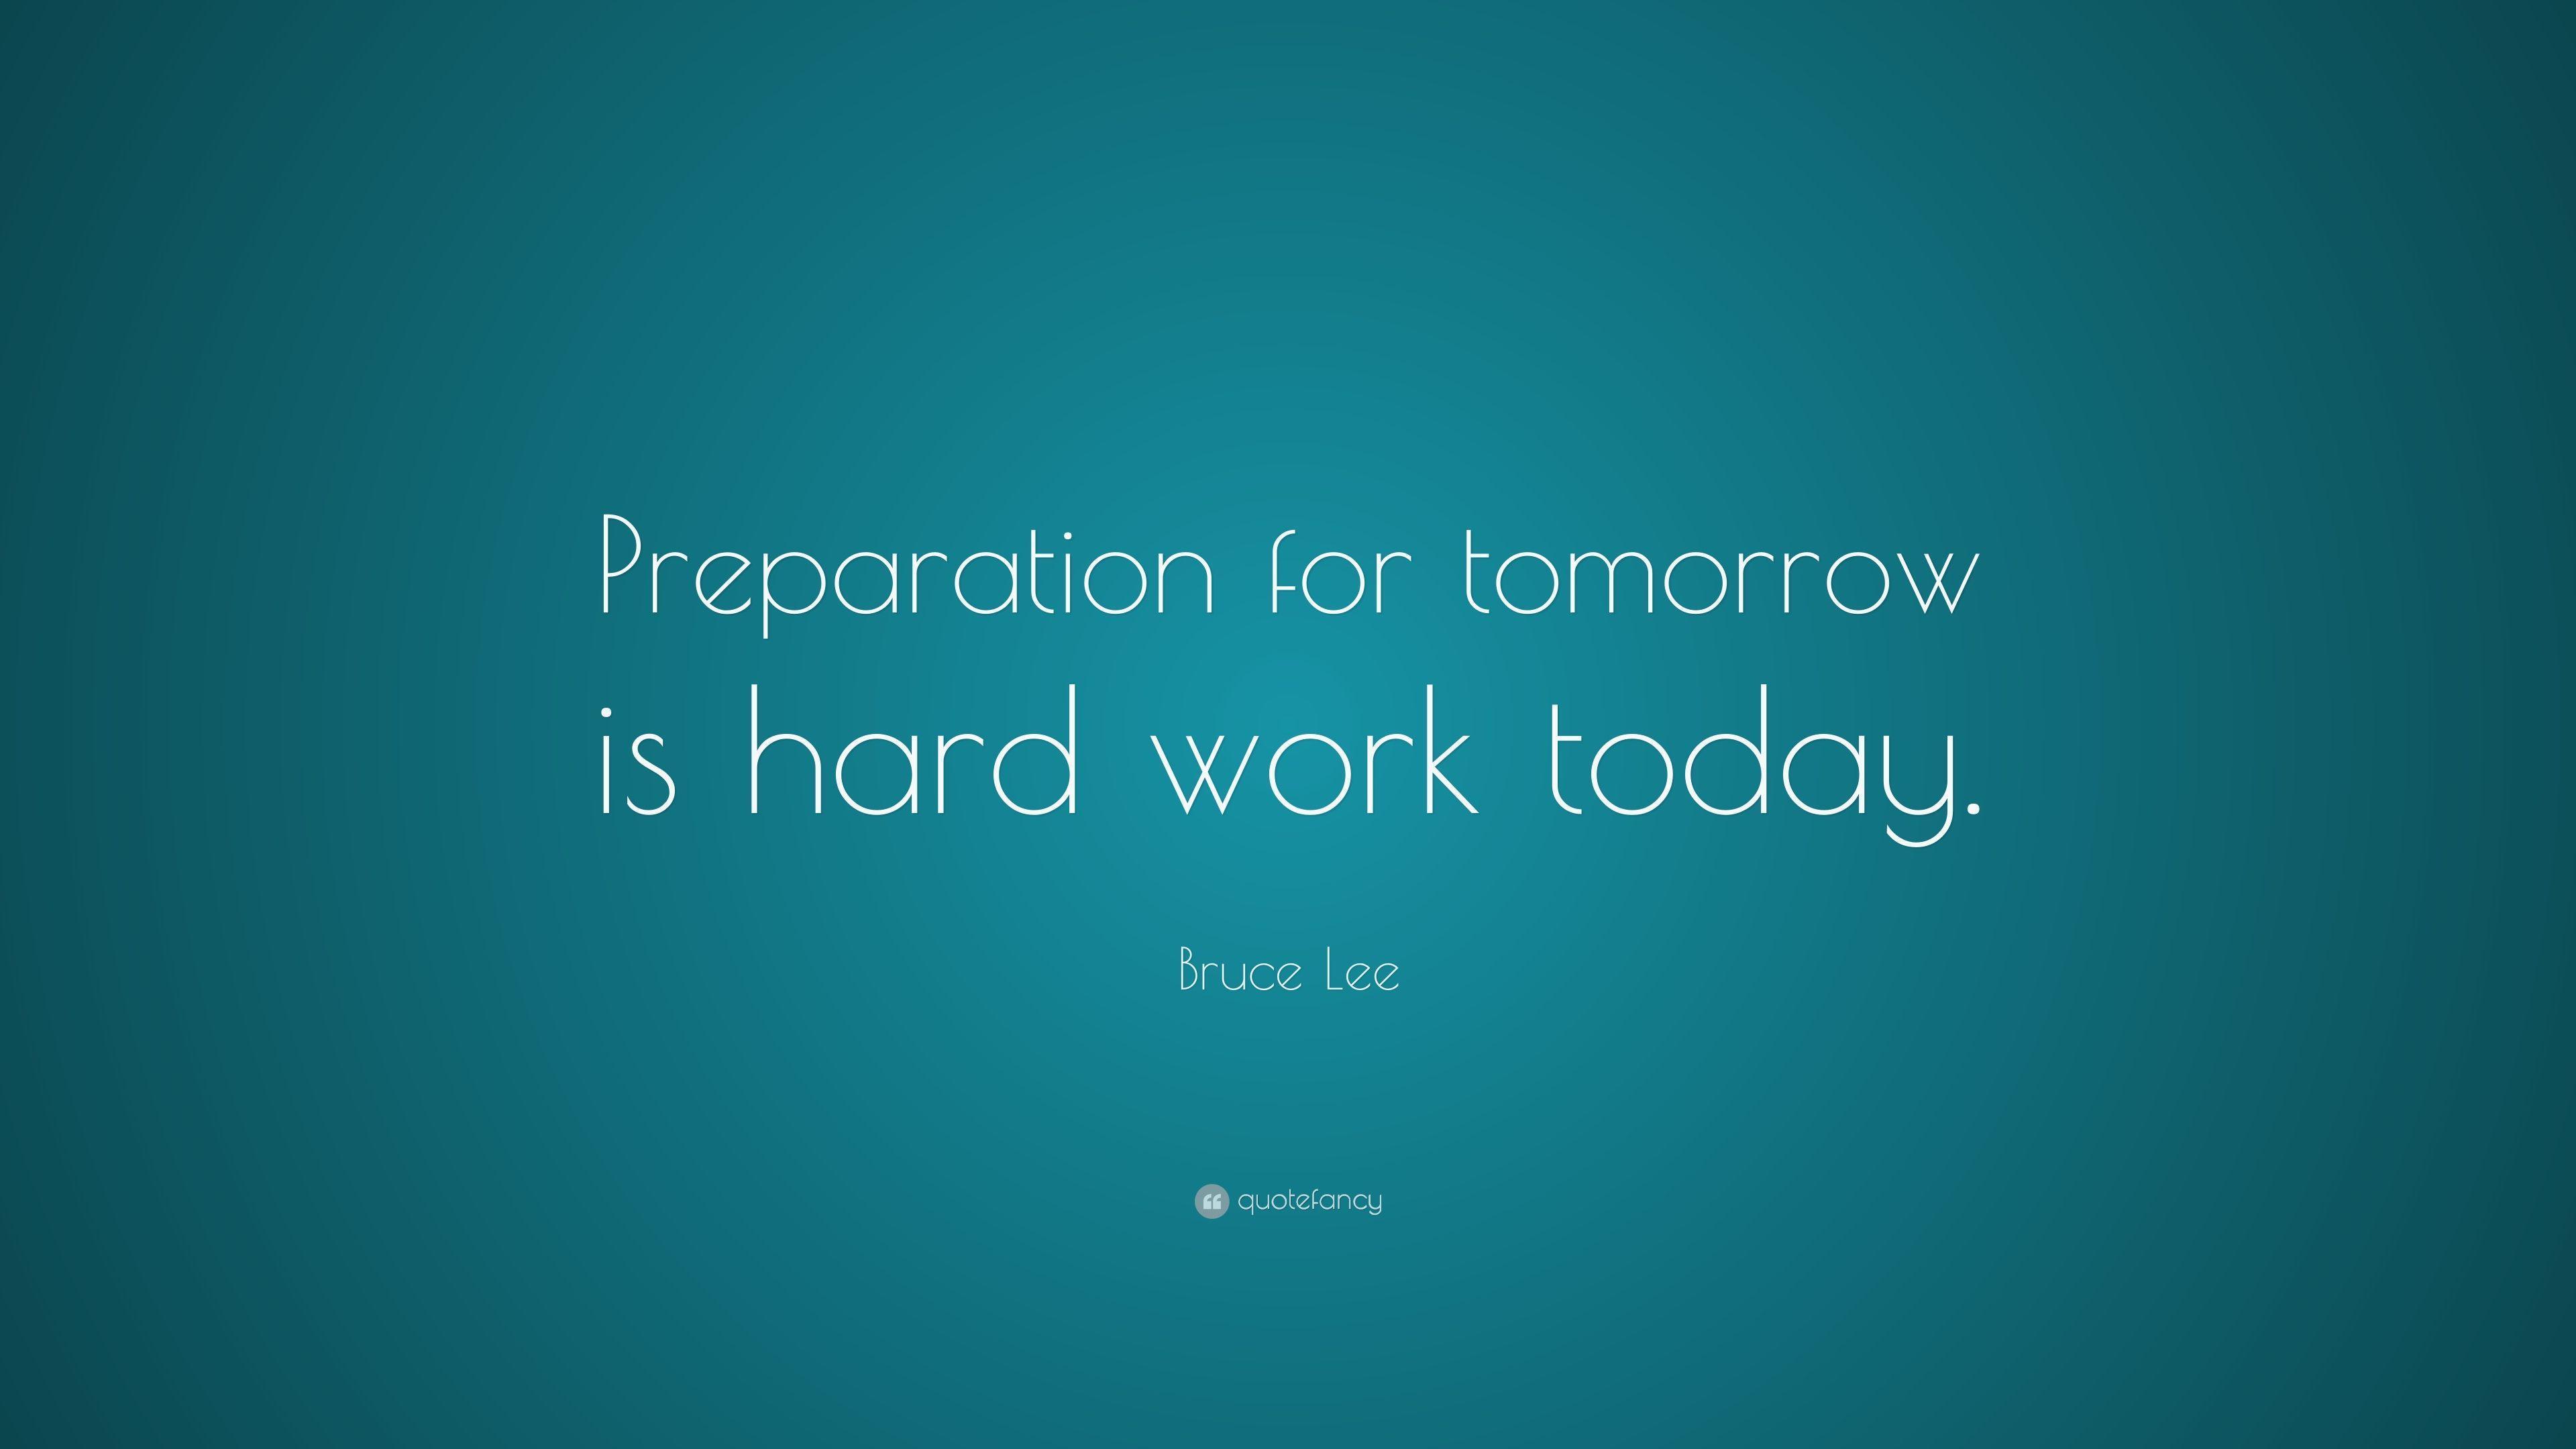 Bruce Lee Quote: “Preparation for tomorrow is hard work today.” (25 wallpaper)